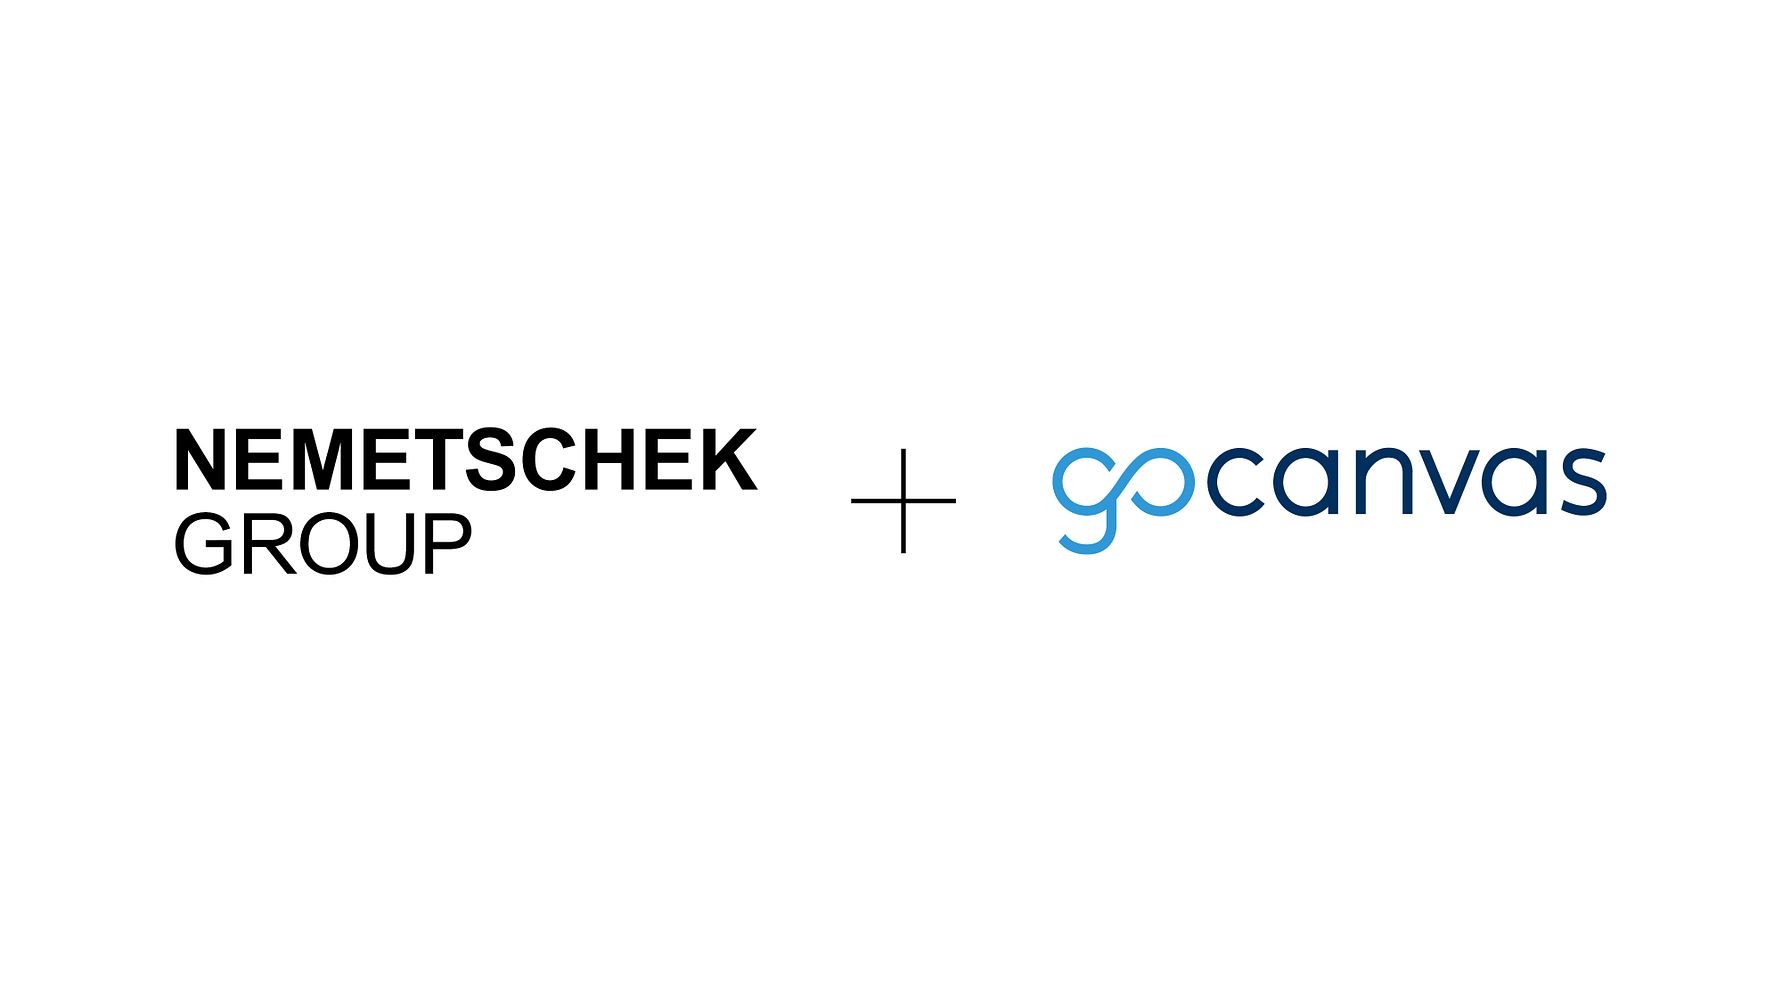 Nemetschek Group to Acquire GoCanvas to further Accelerate Digitalization in Construction Industry